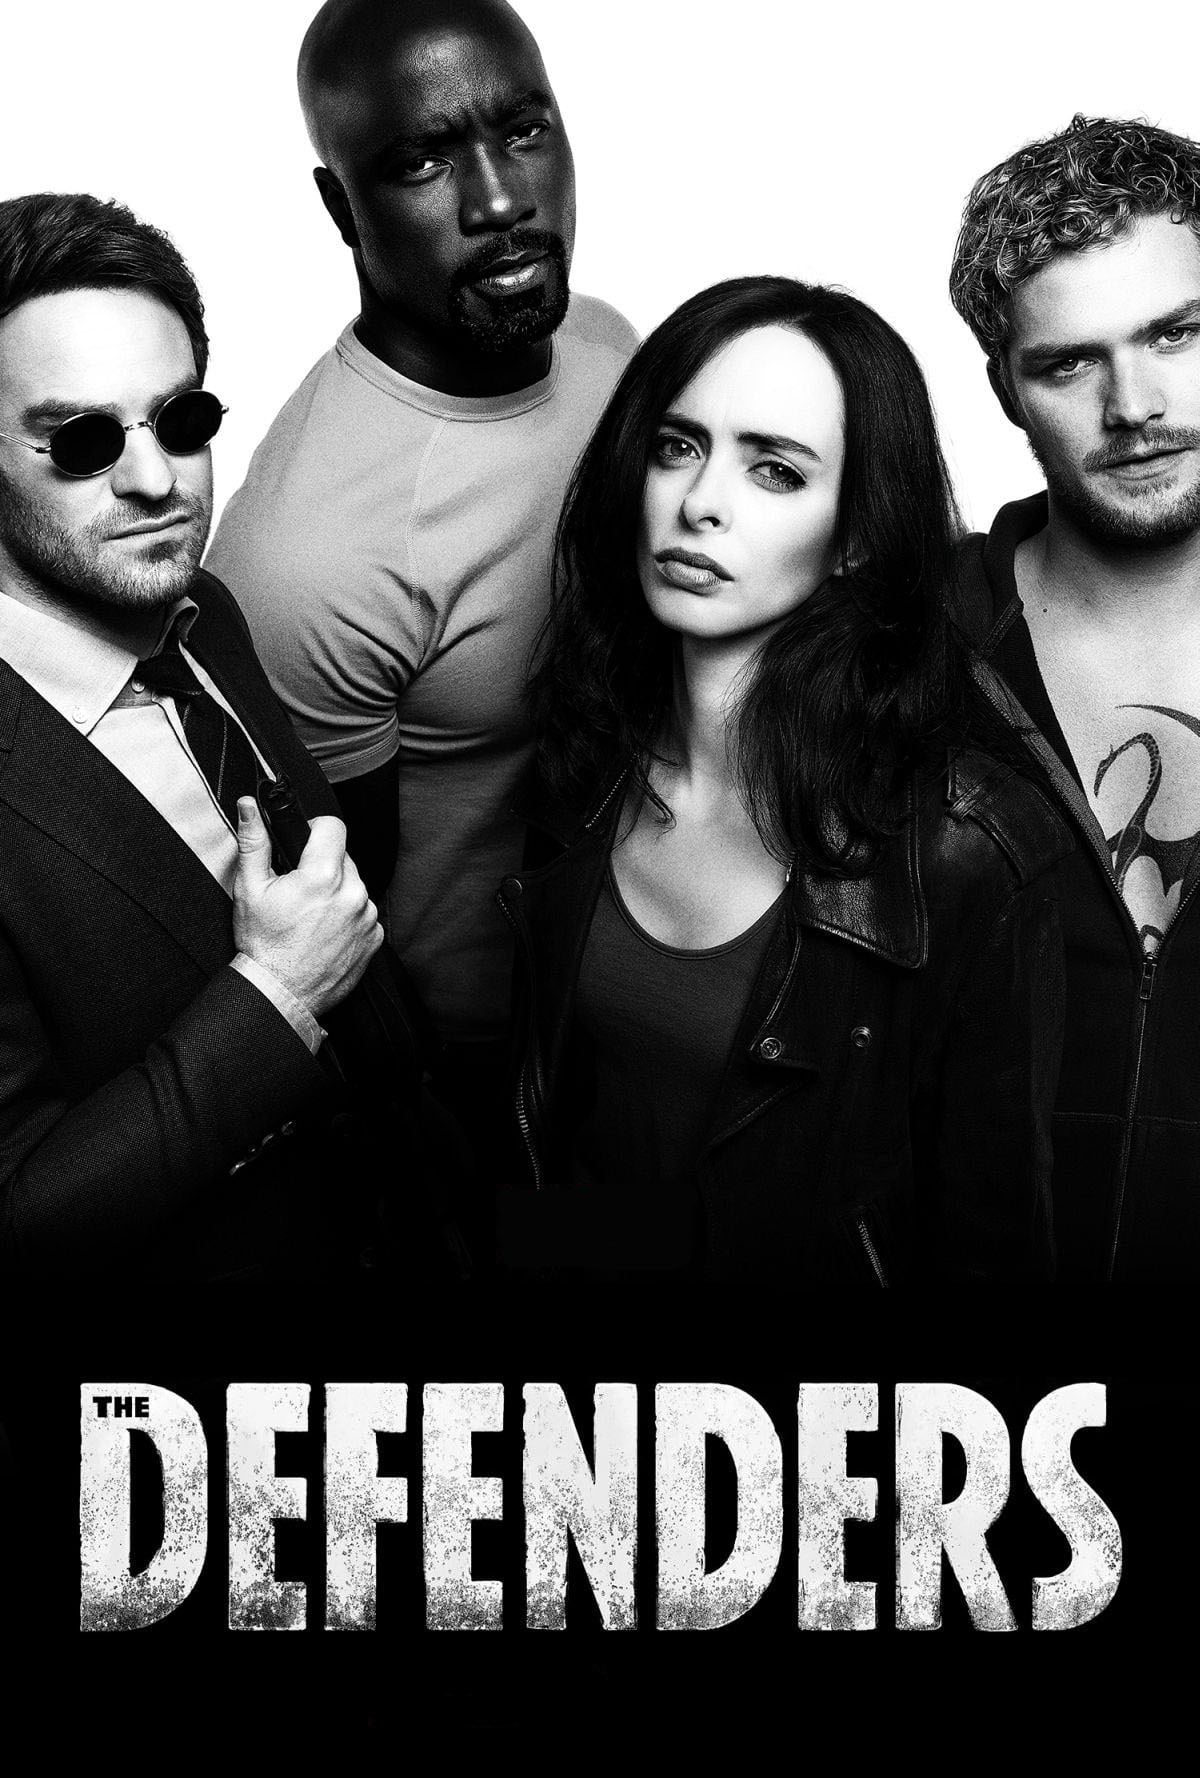 Marvel's The Defenders TV Shows About Masked Superhero